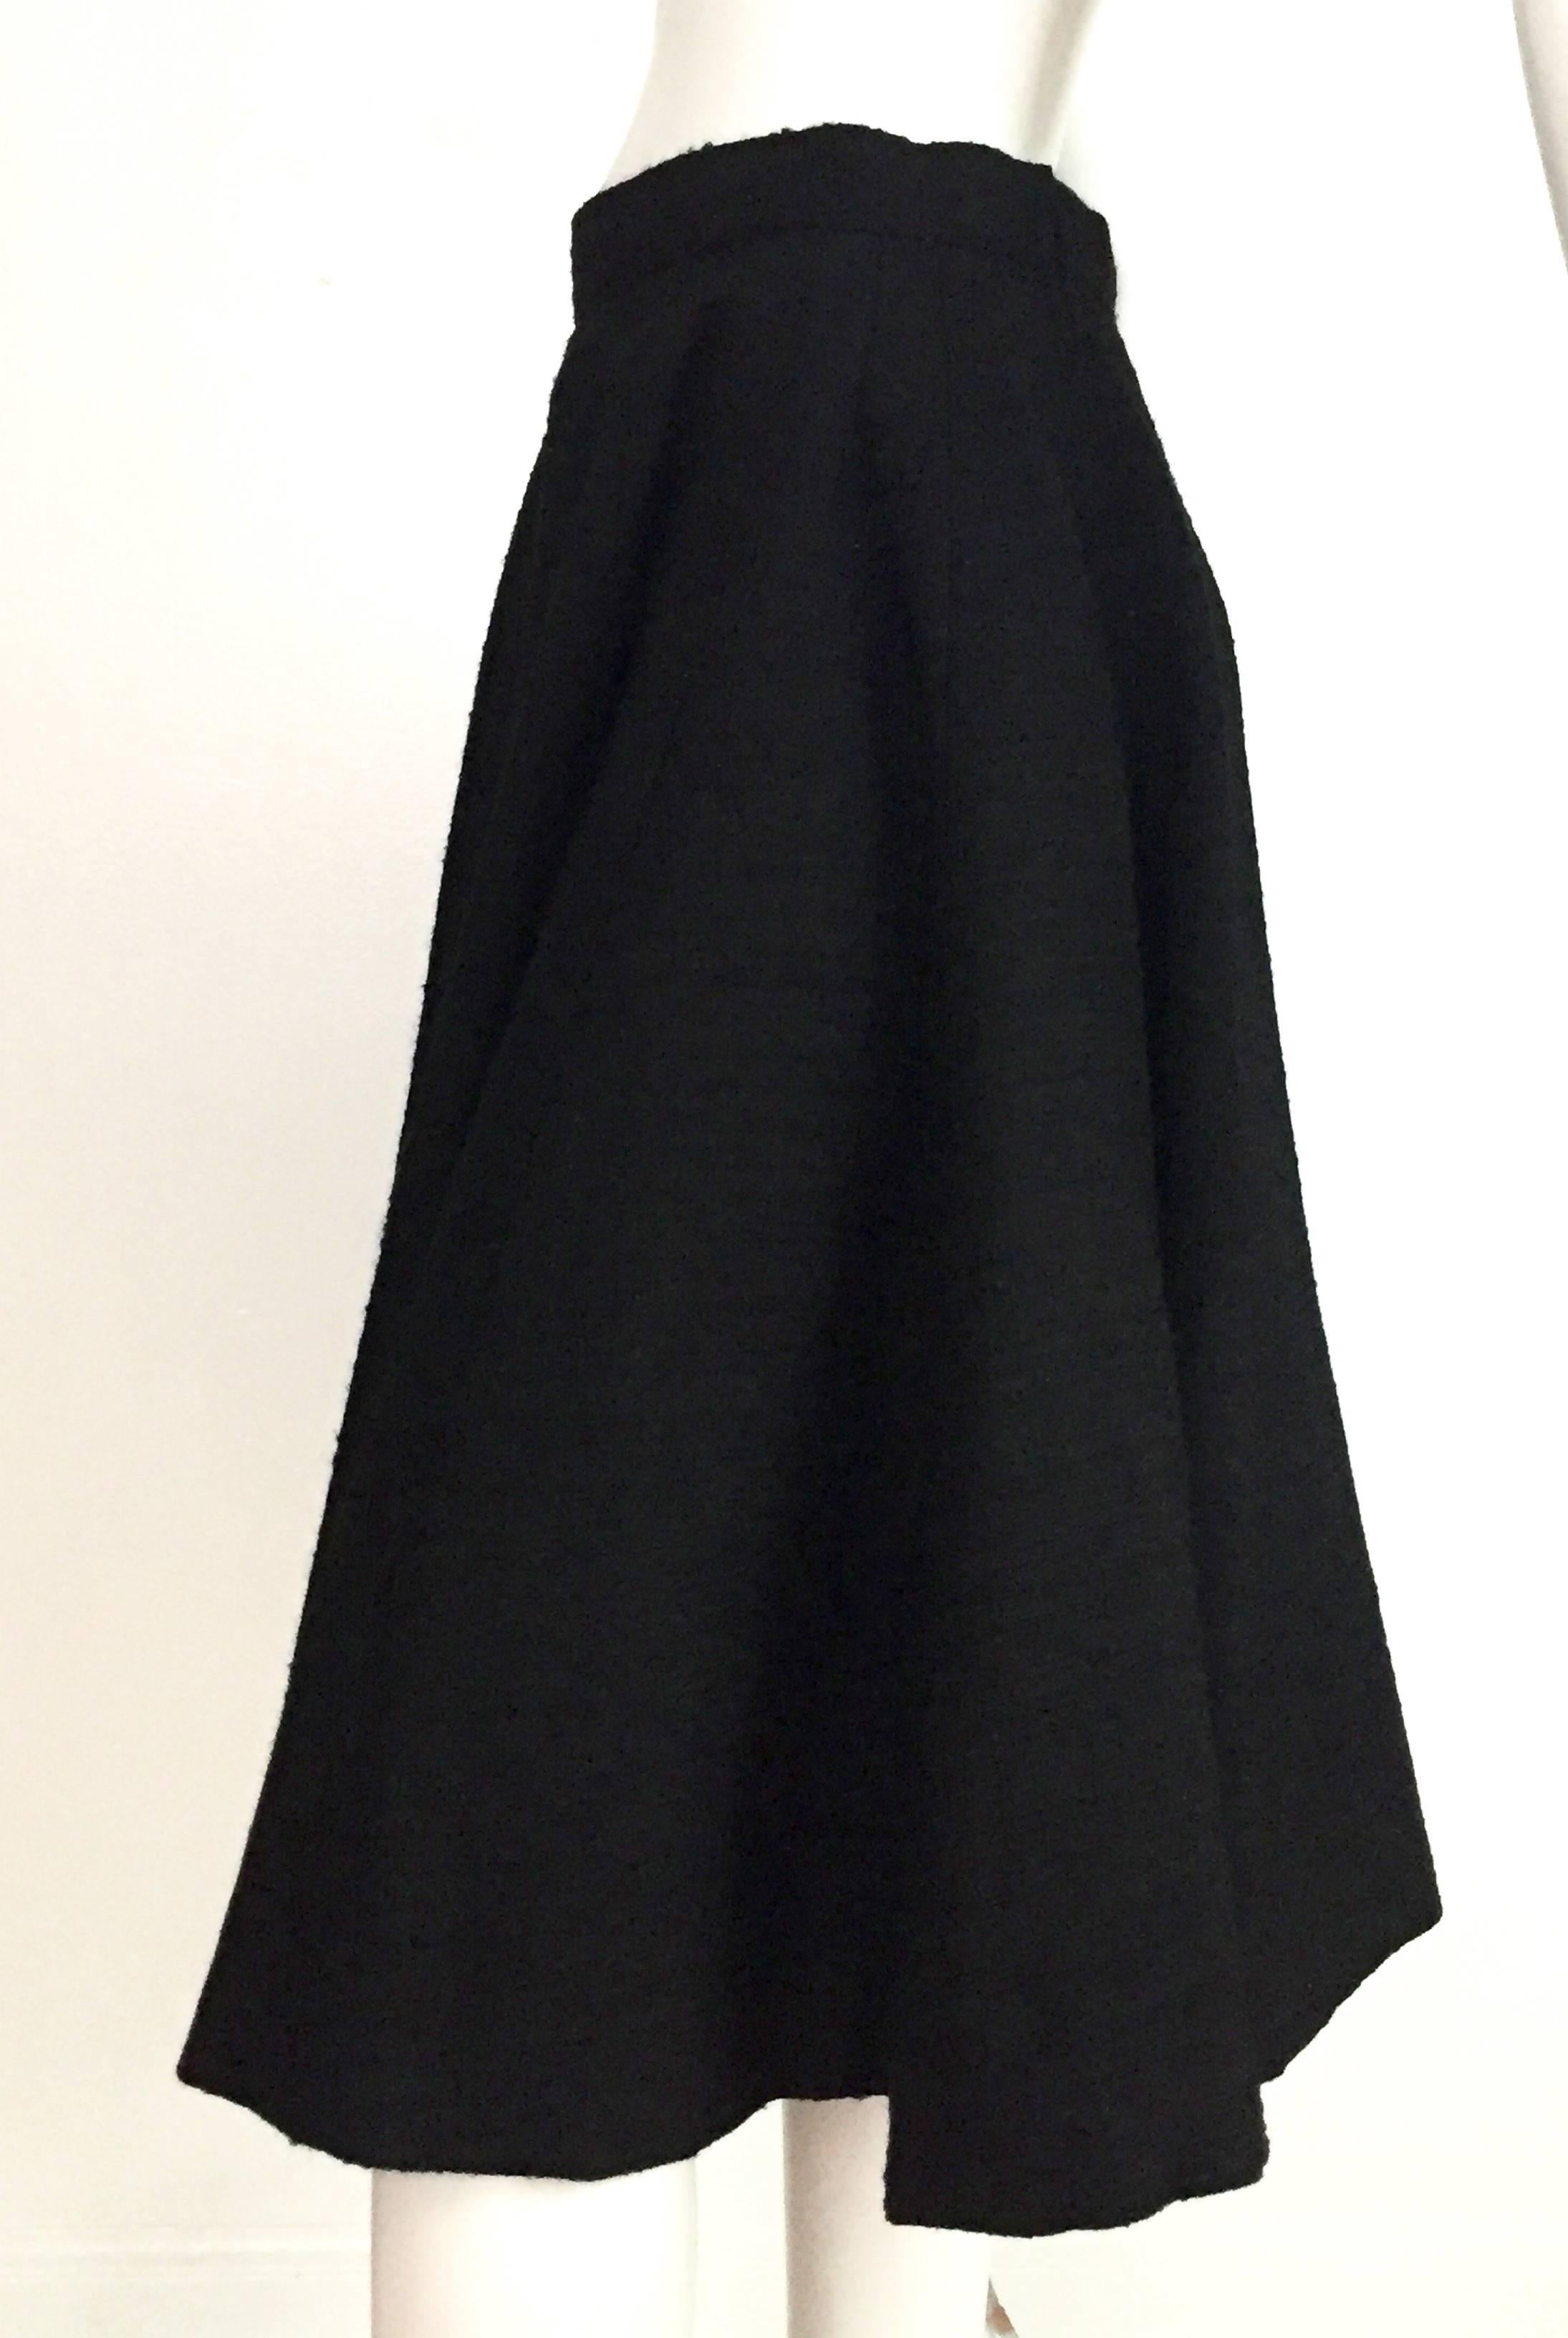 Norman Norell 1957 black nubby flare wool skirt will fit a size 6 / 8 because it is a high waisted skirt but please see & use measurements below so that you may properly measure your lovely body. Vertical panels compose this brilliantly constructed